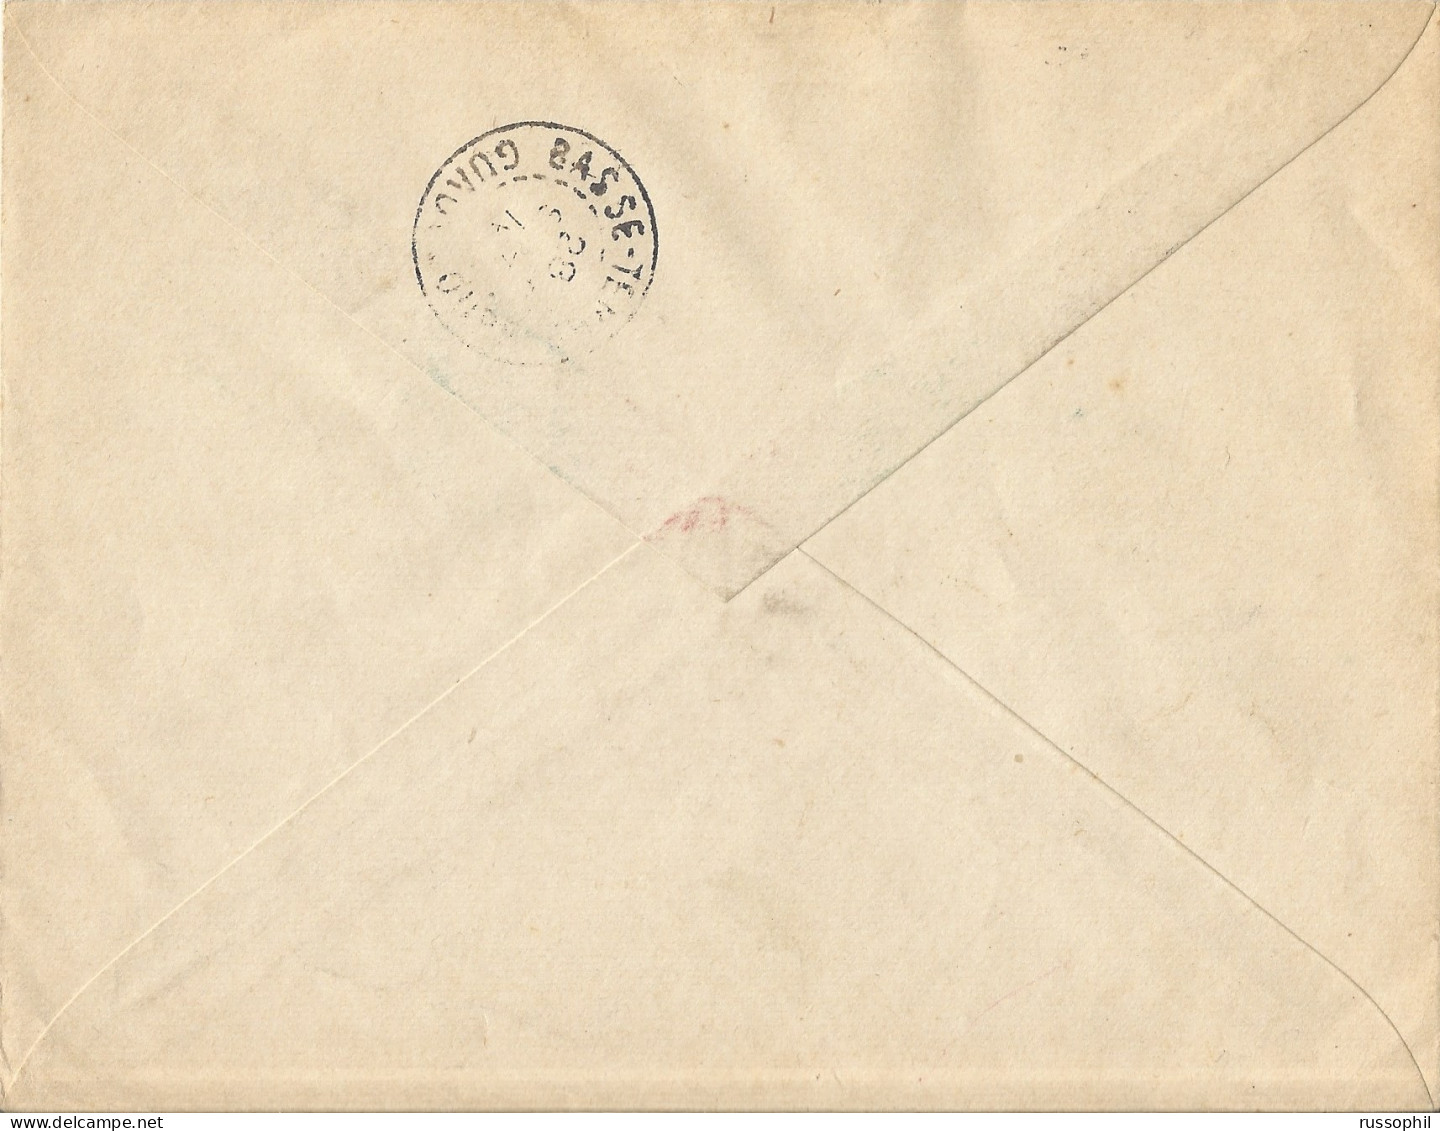 GUADELOUPE - FDC - 3 FR. 30 CENT. 5 STAMP FRANKING ON COVER FROM POINTE A PITRE TO BASSE TERRE - 27 SEPT 1943 - Briefe U. Dokumente